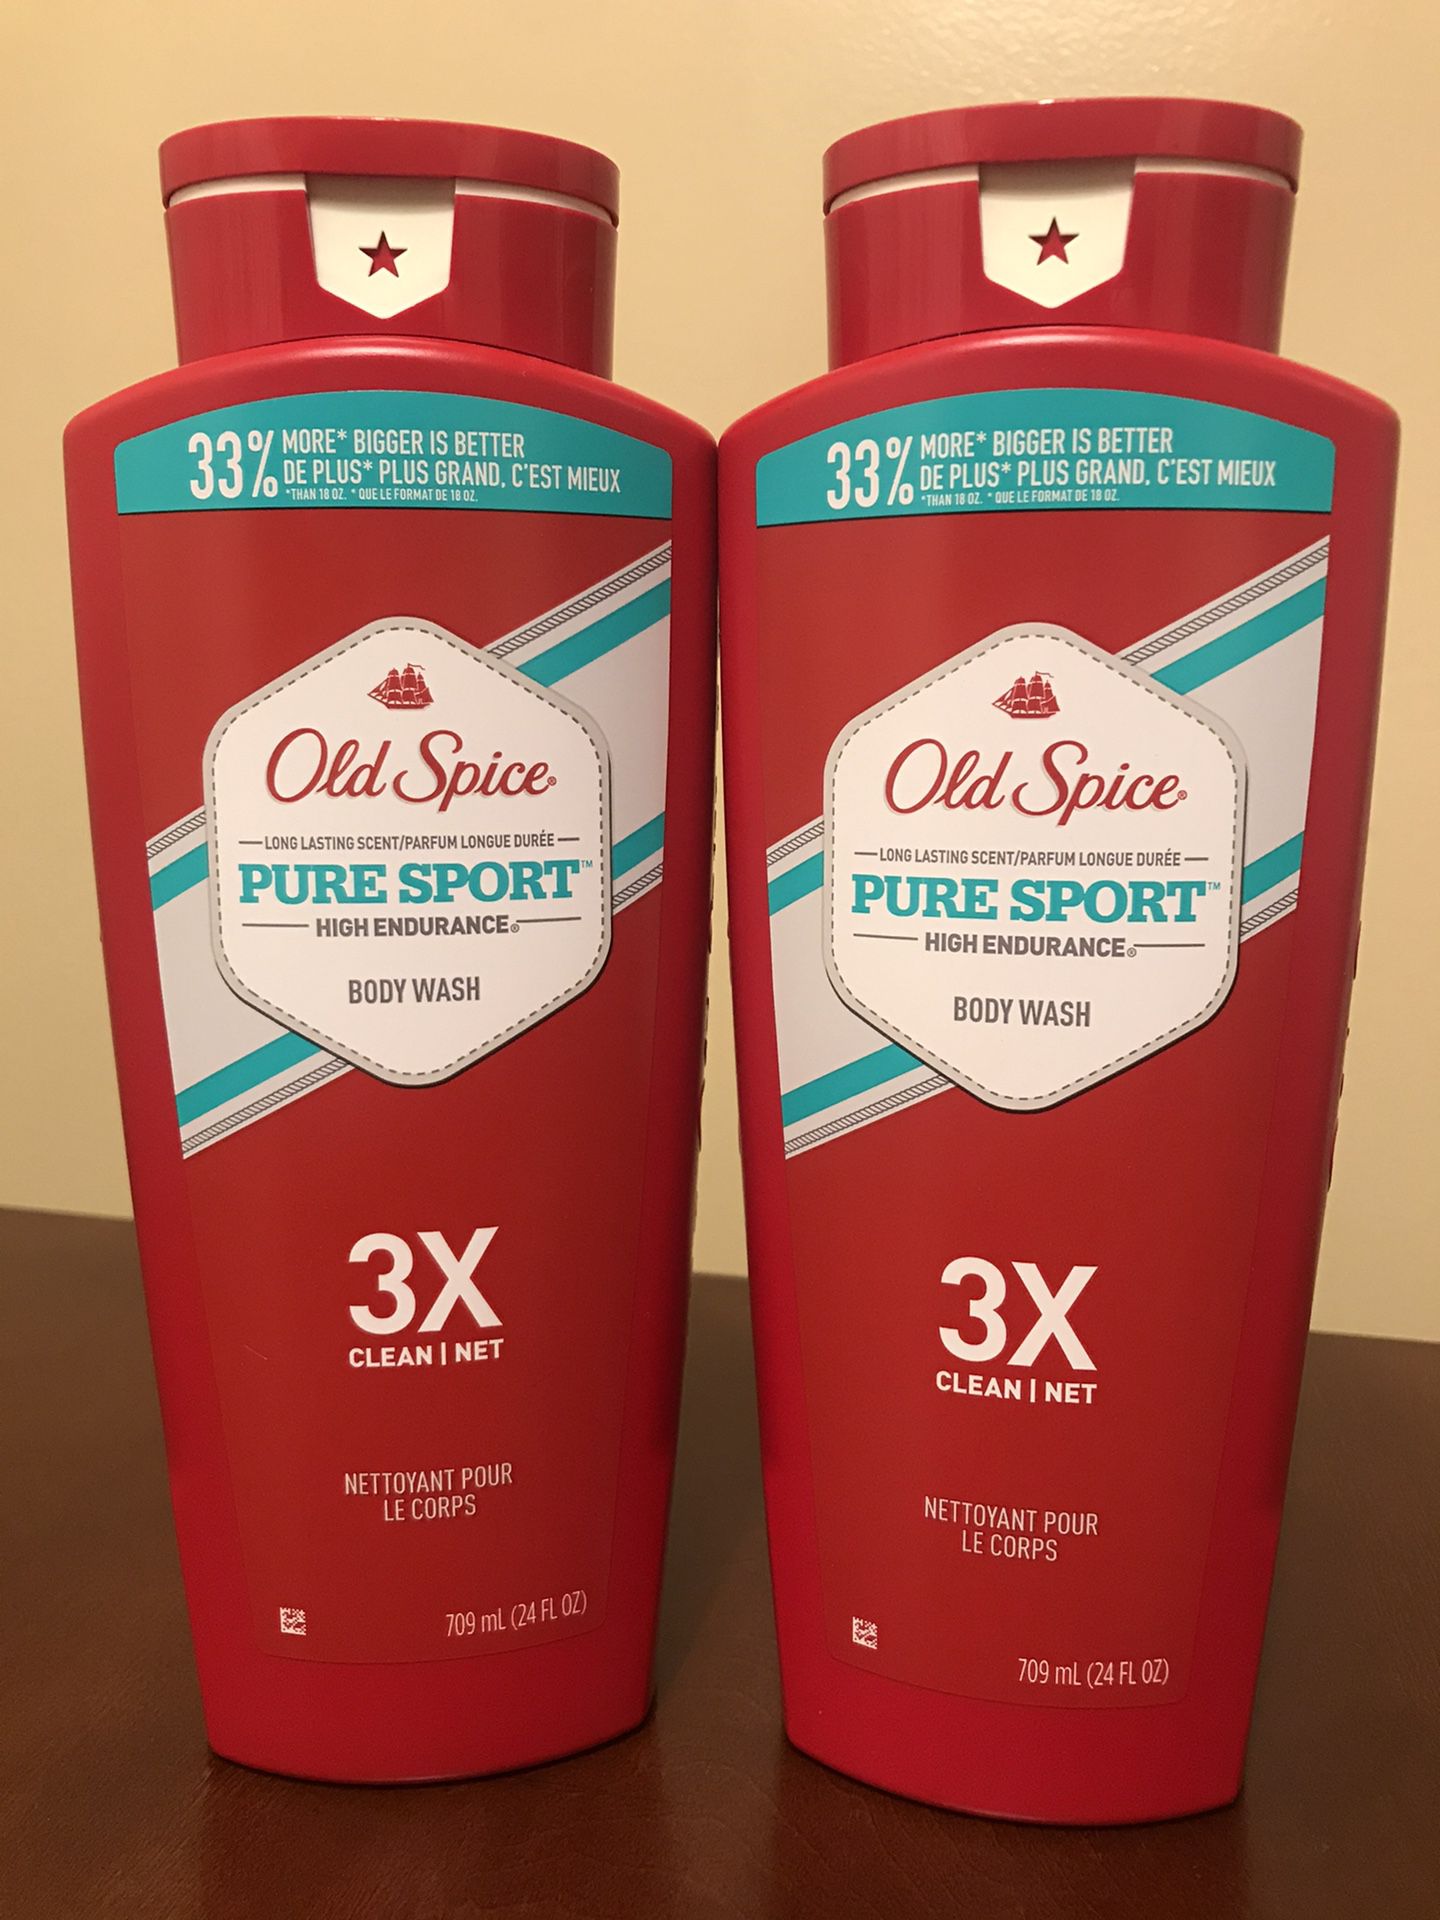 Old Spice PURE SPORT, body wash. $4 each.